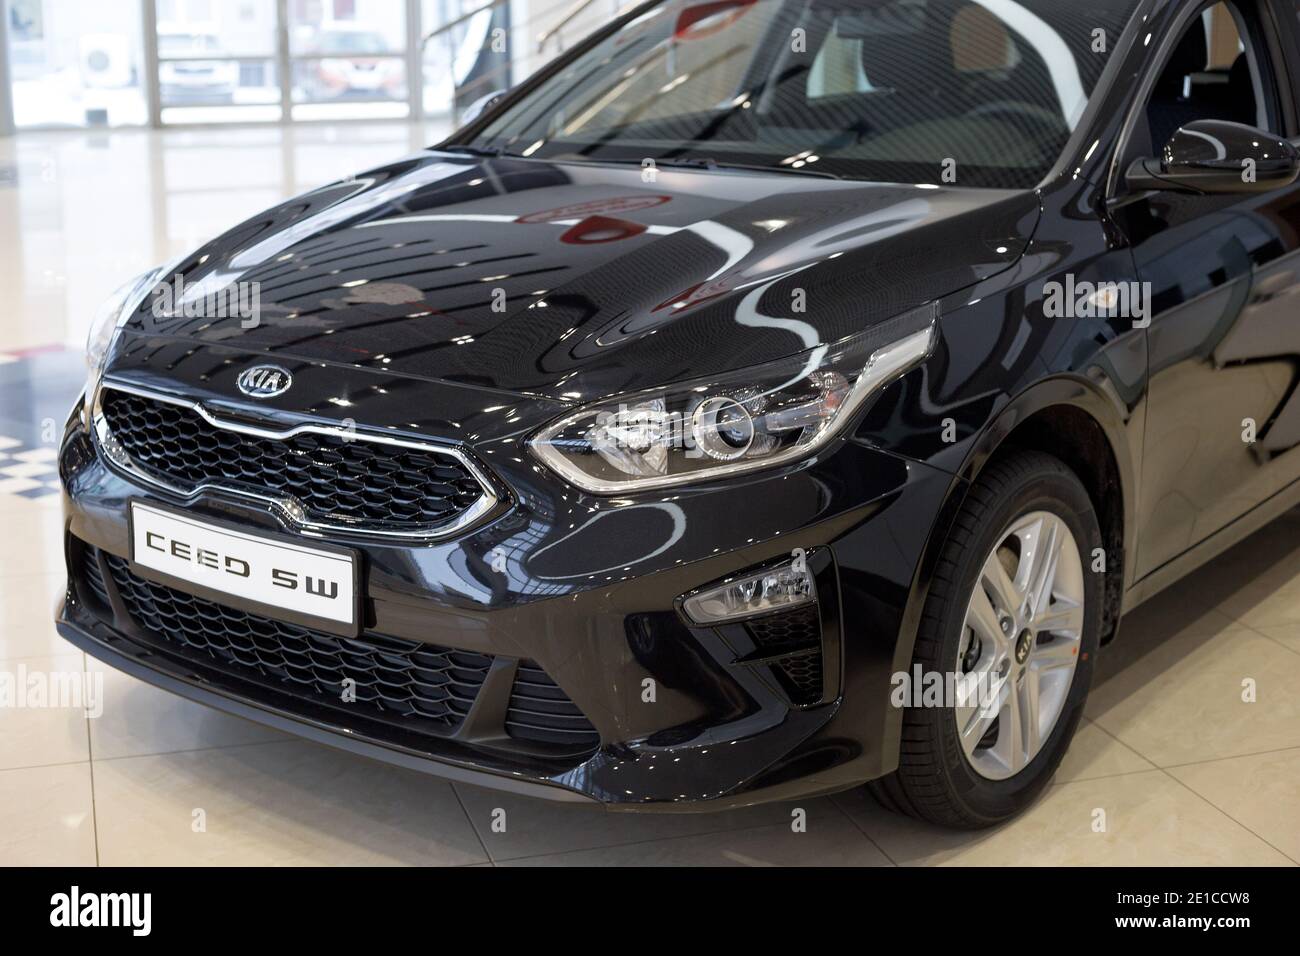 Russia, Izhevsk - December 28, 2020: KIA showroom. New Ceed SW car in dealer showroom. Cropped image. Famous world brand. Stock Photo